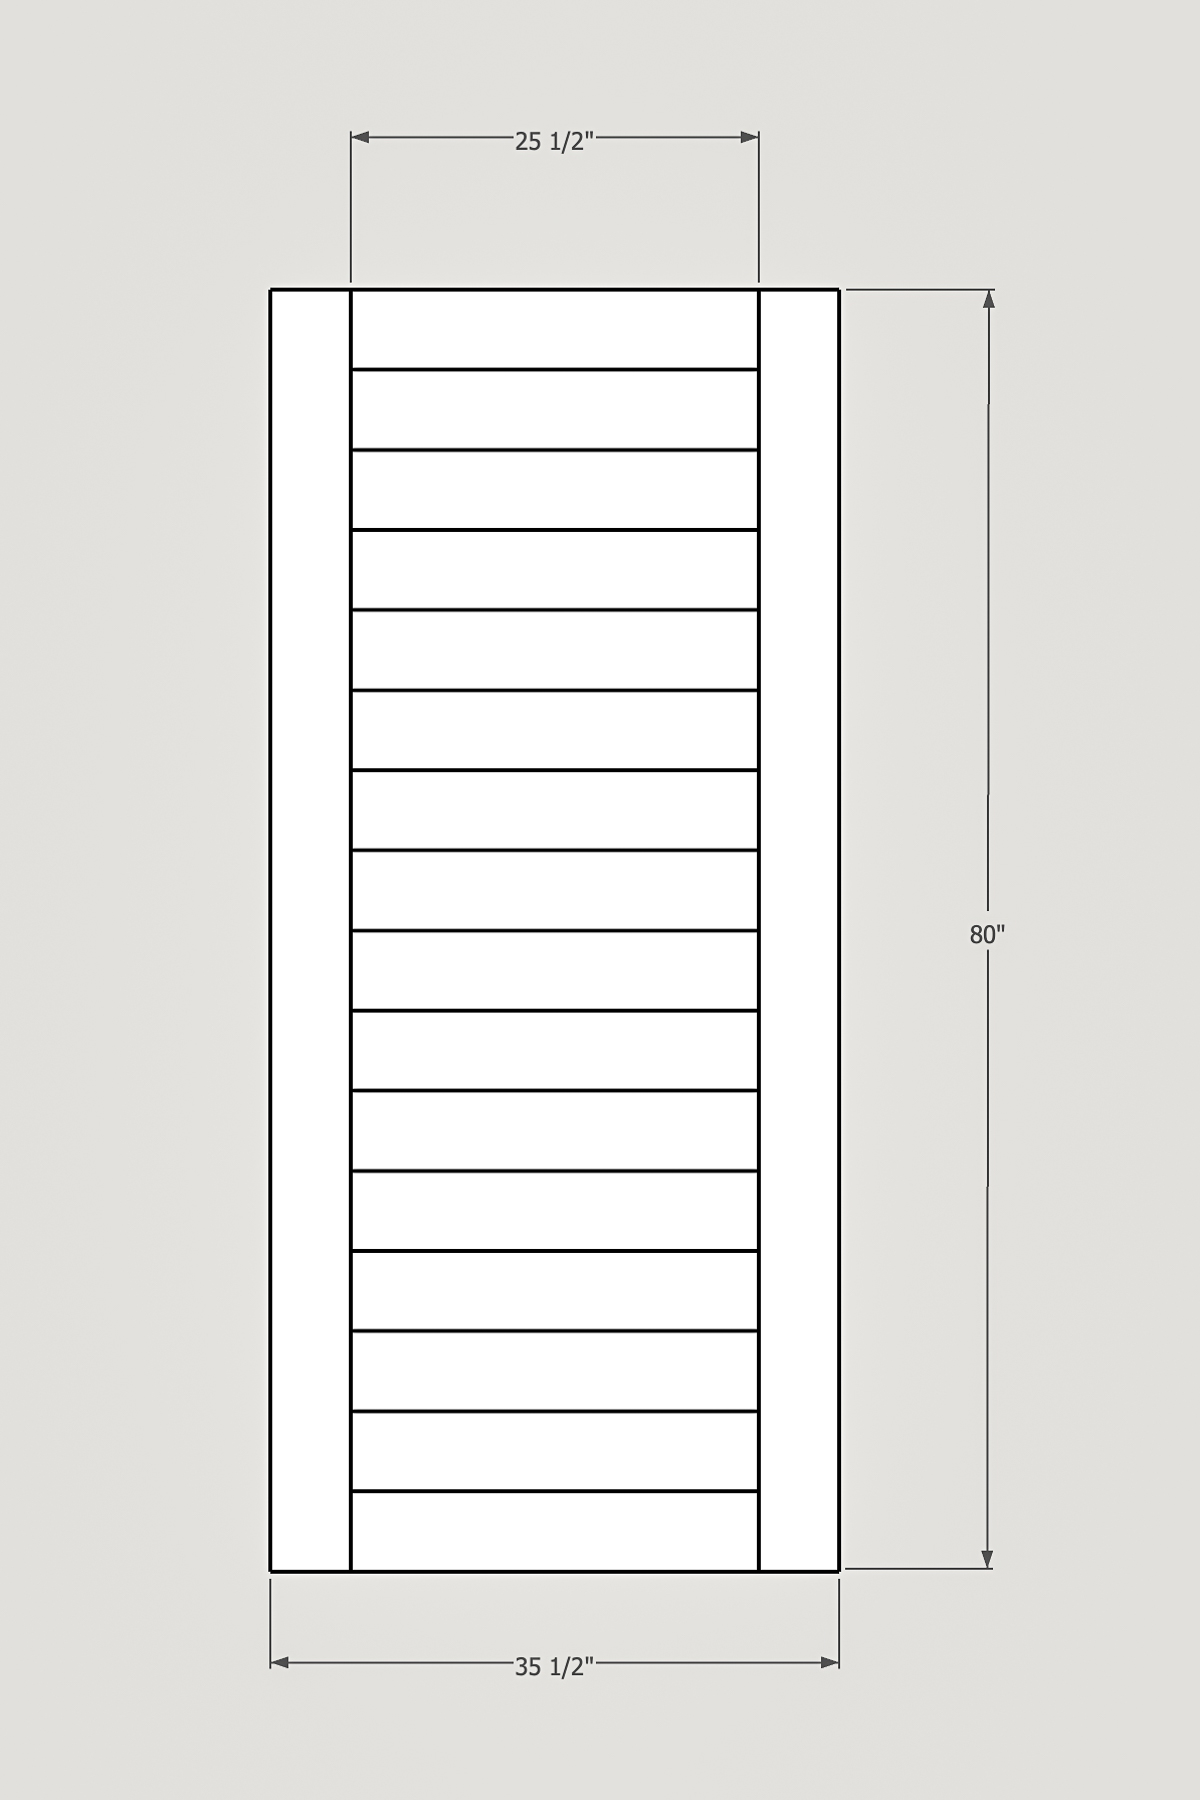 sketchup model of shed door with dimensions